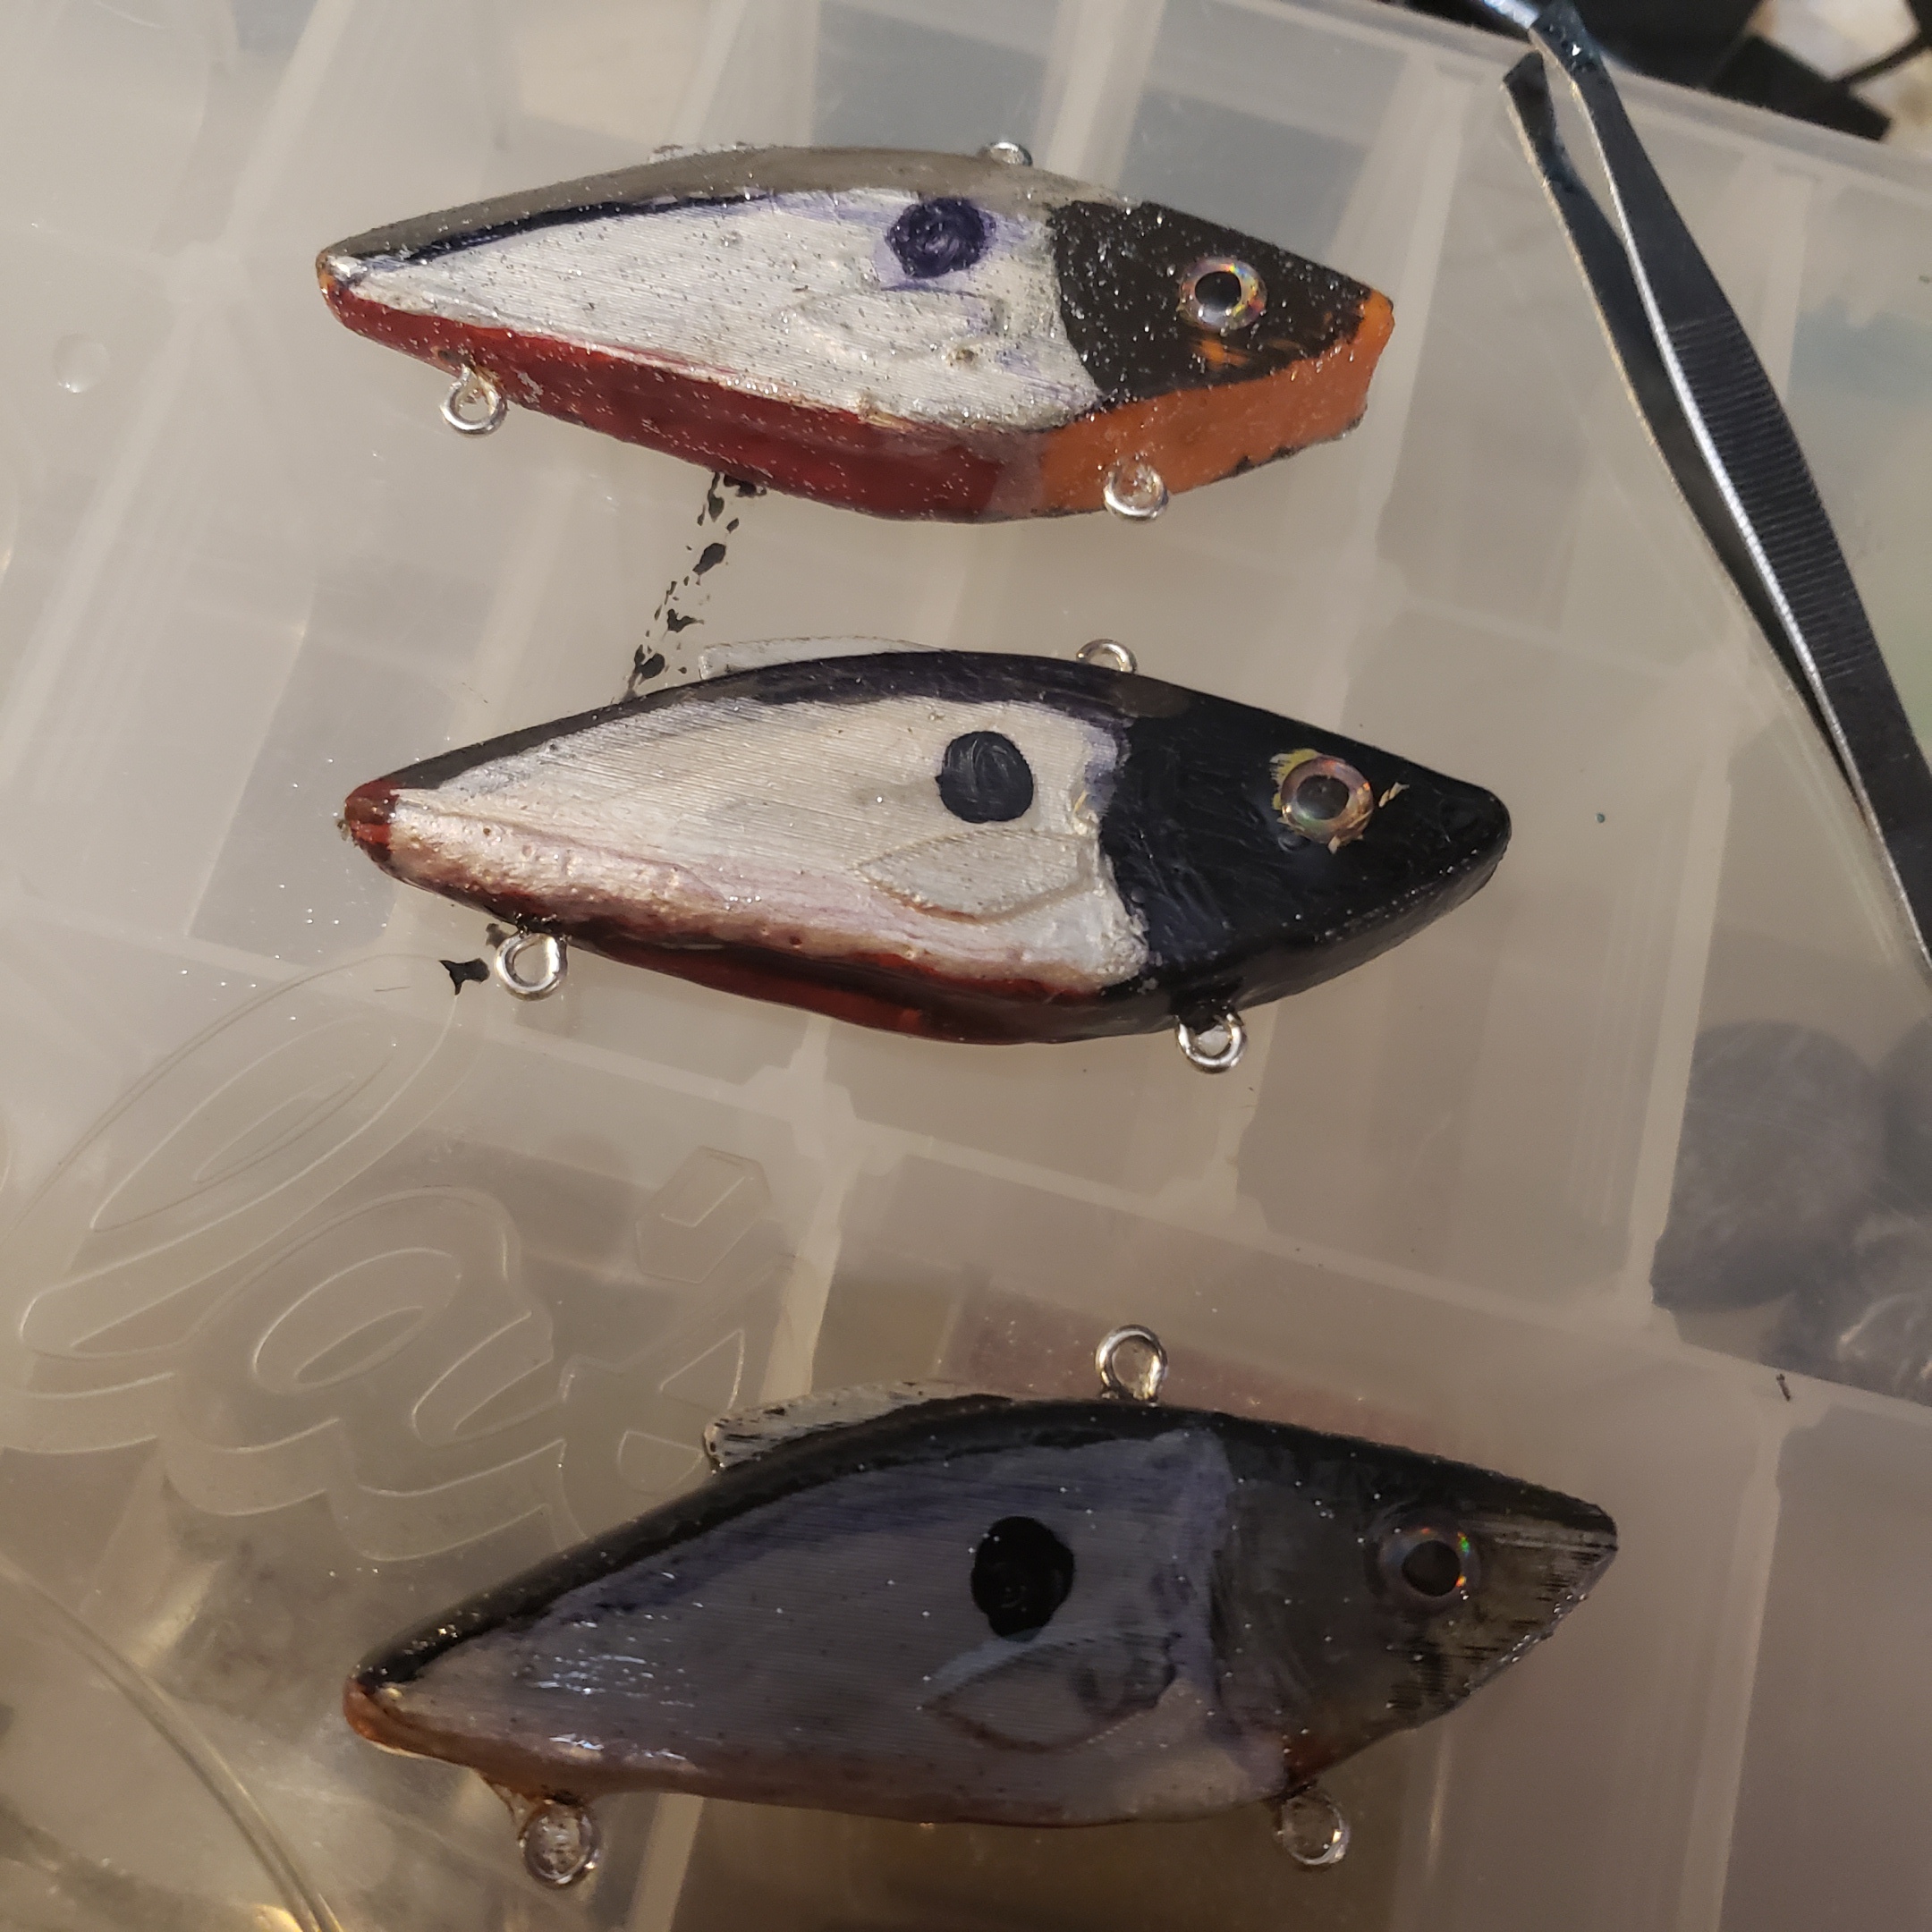 DIY Rattletrap lure - What are you making? - MakeICT